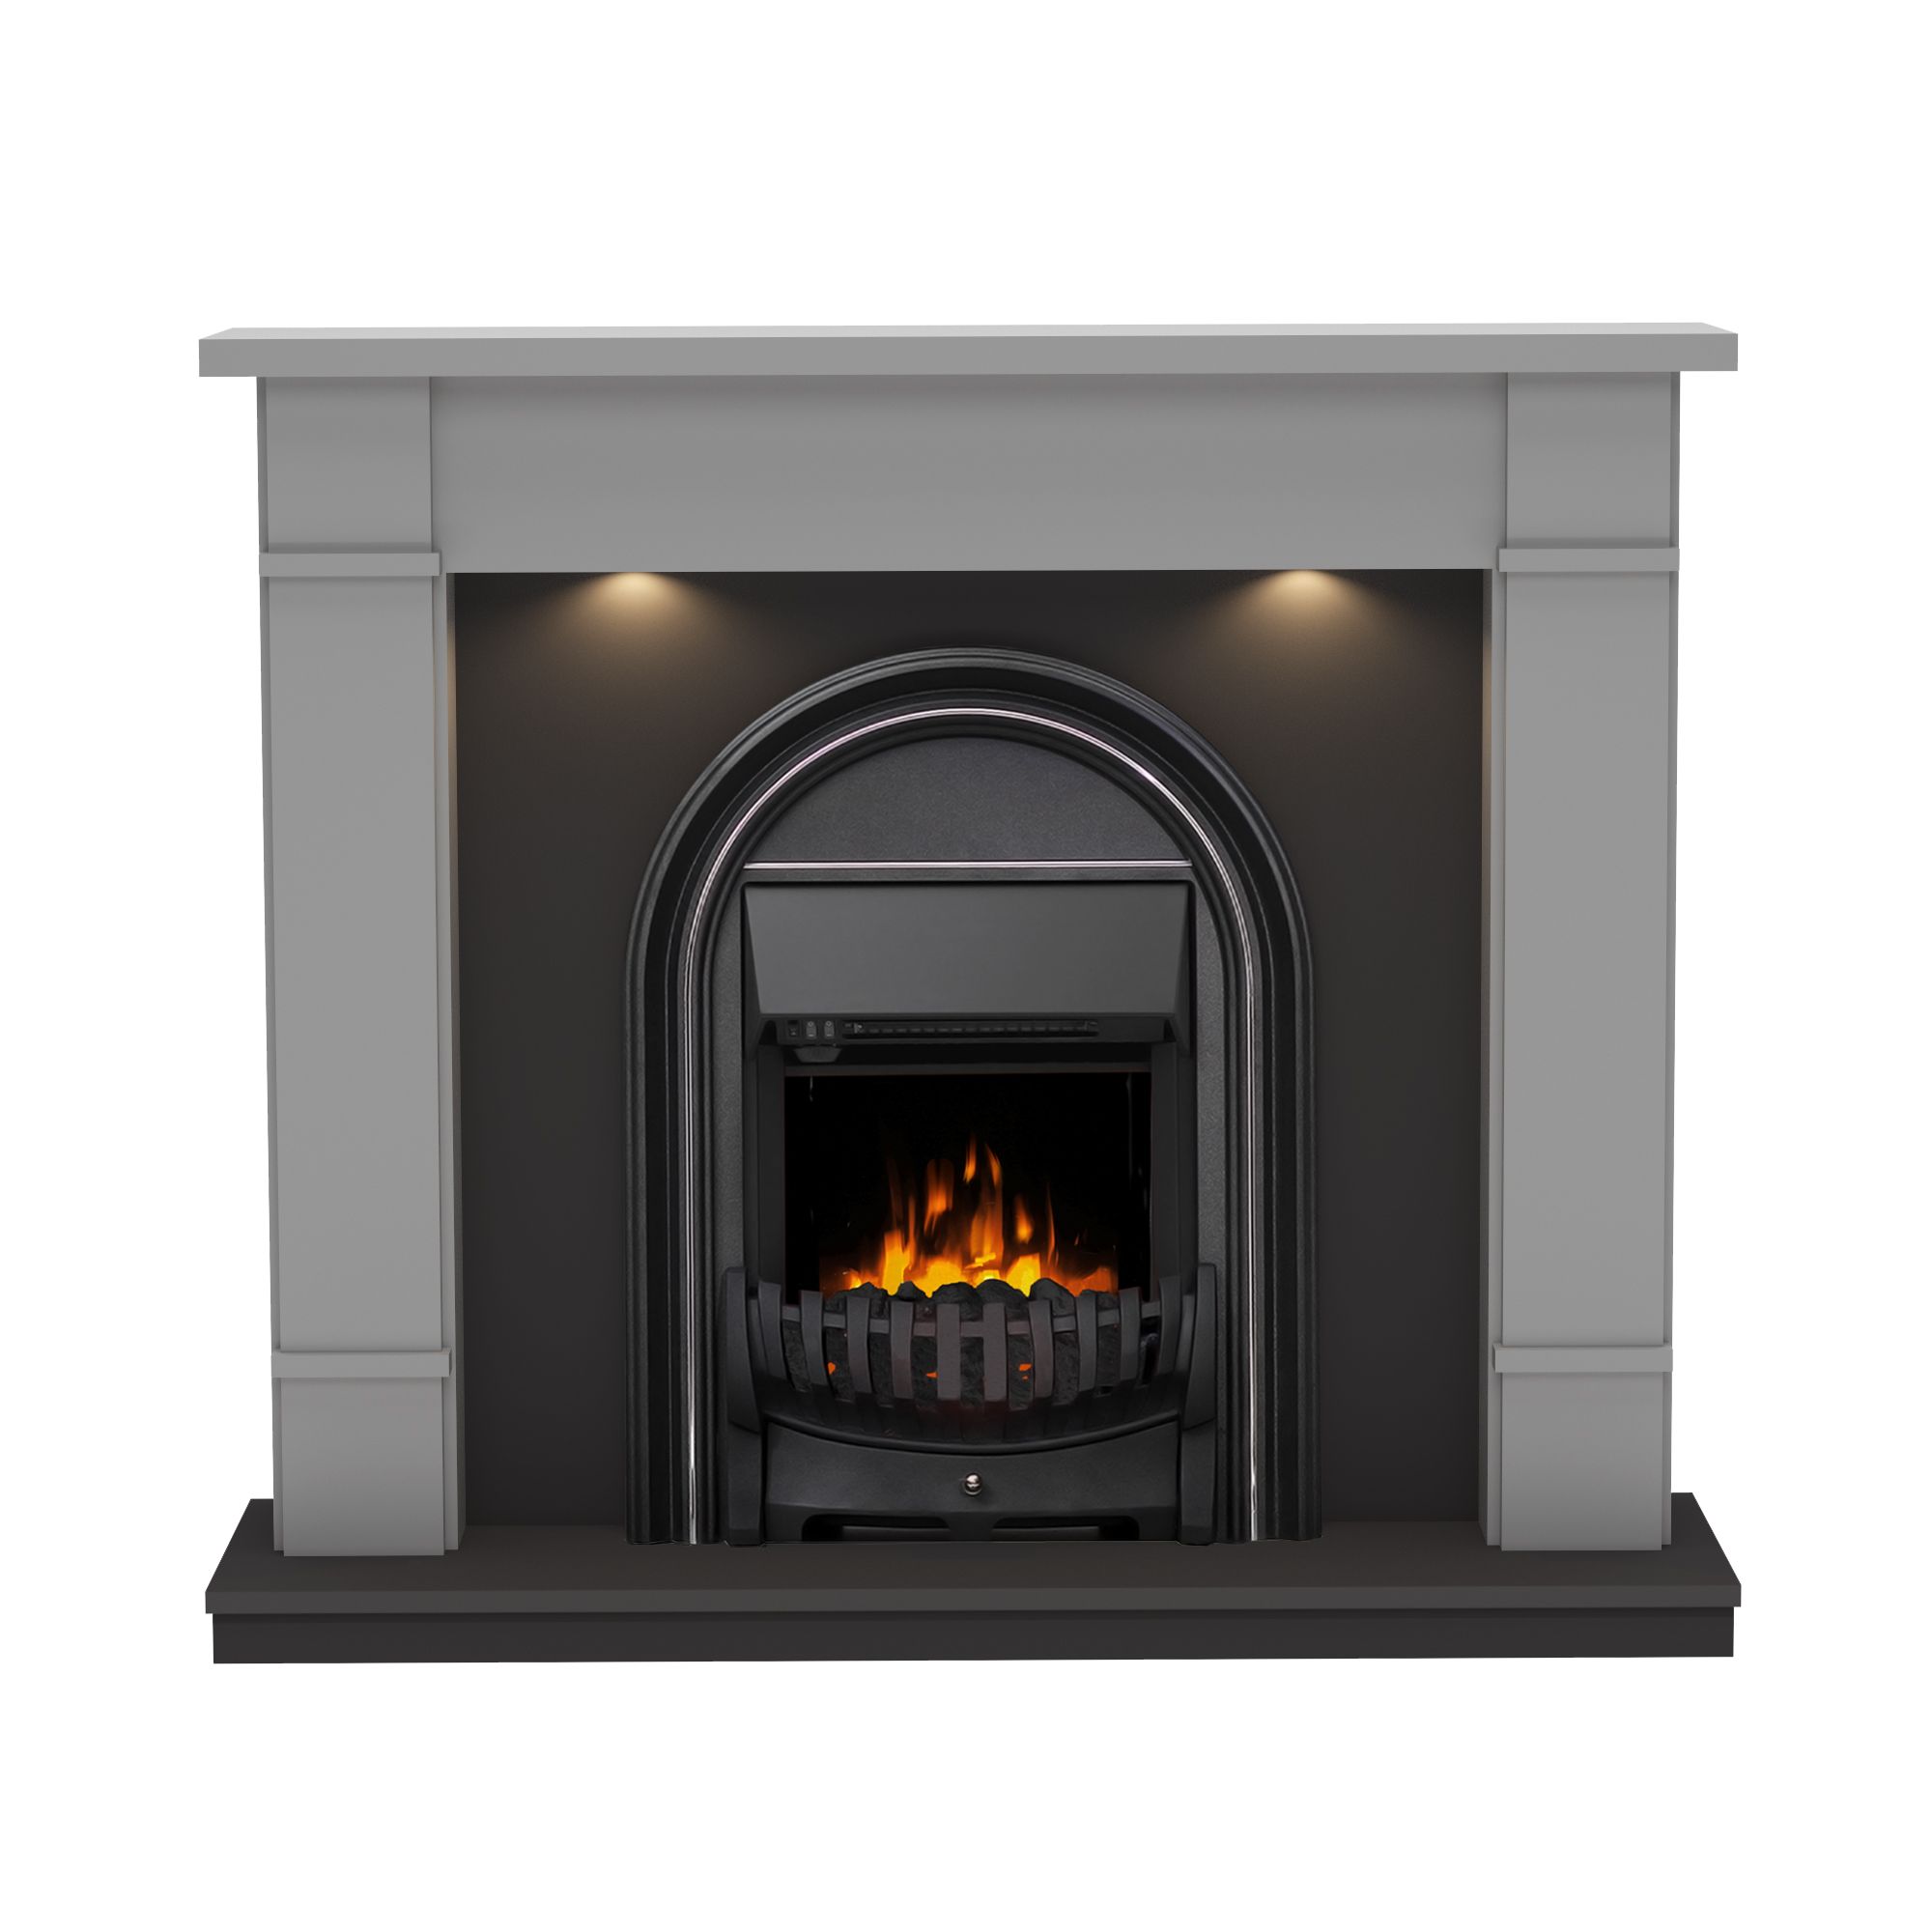 Be Modern Deansgate Light grey & black Inset Electric Fire suite